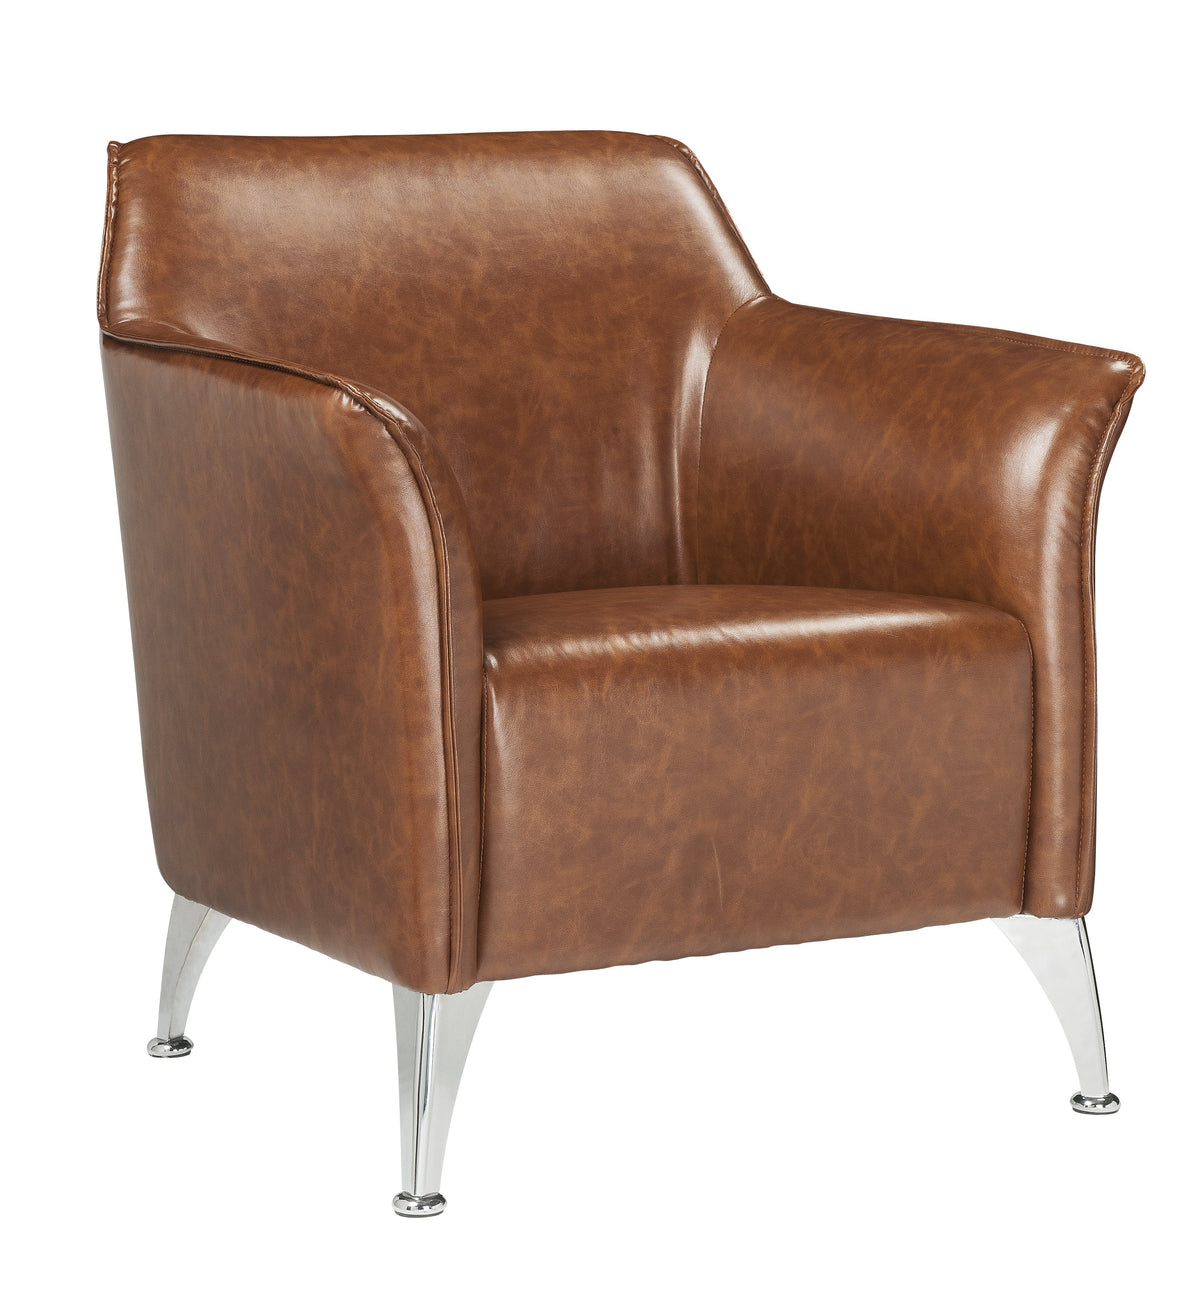 Leatherette Accent Chair with Track Armrest and Welt Trim Details, Brown - BM214954